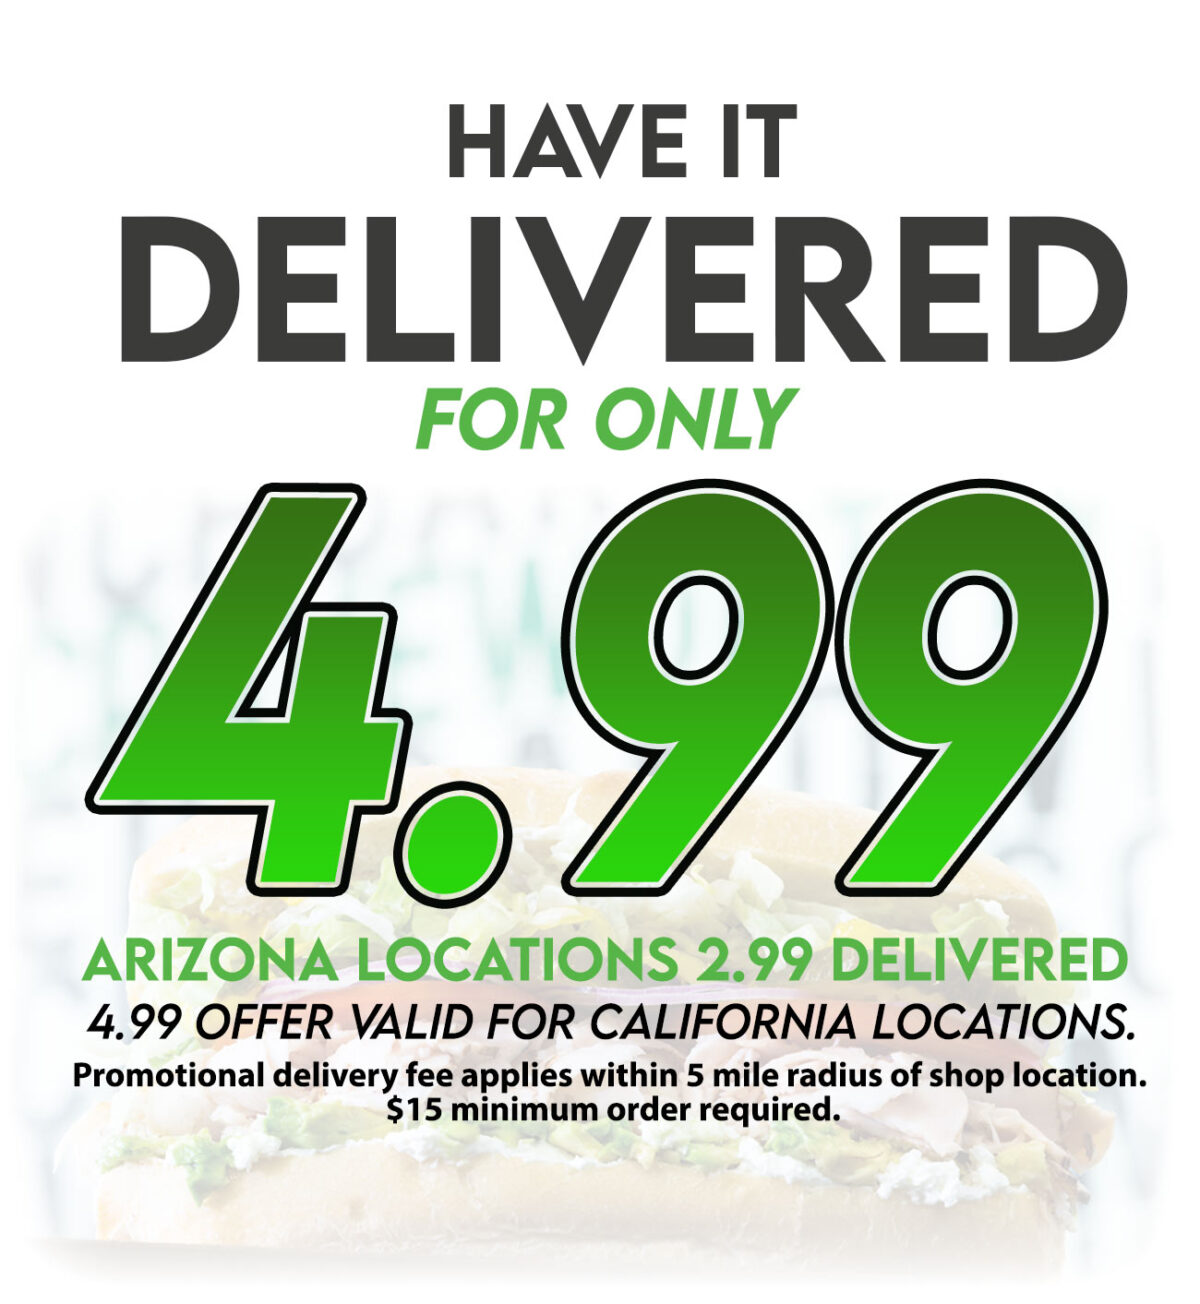 Mr. Pickle's Delivered for only 2.99 Arizona locations .99 delivery. 2.99 Delivery valid in California. Promotional delivery valid within 5 miles of shop locations. 